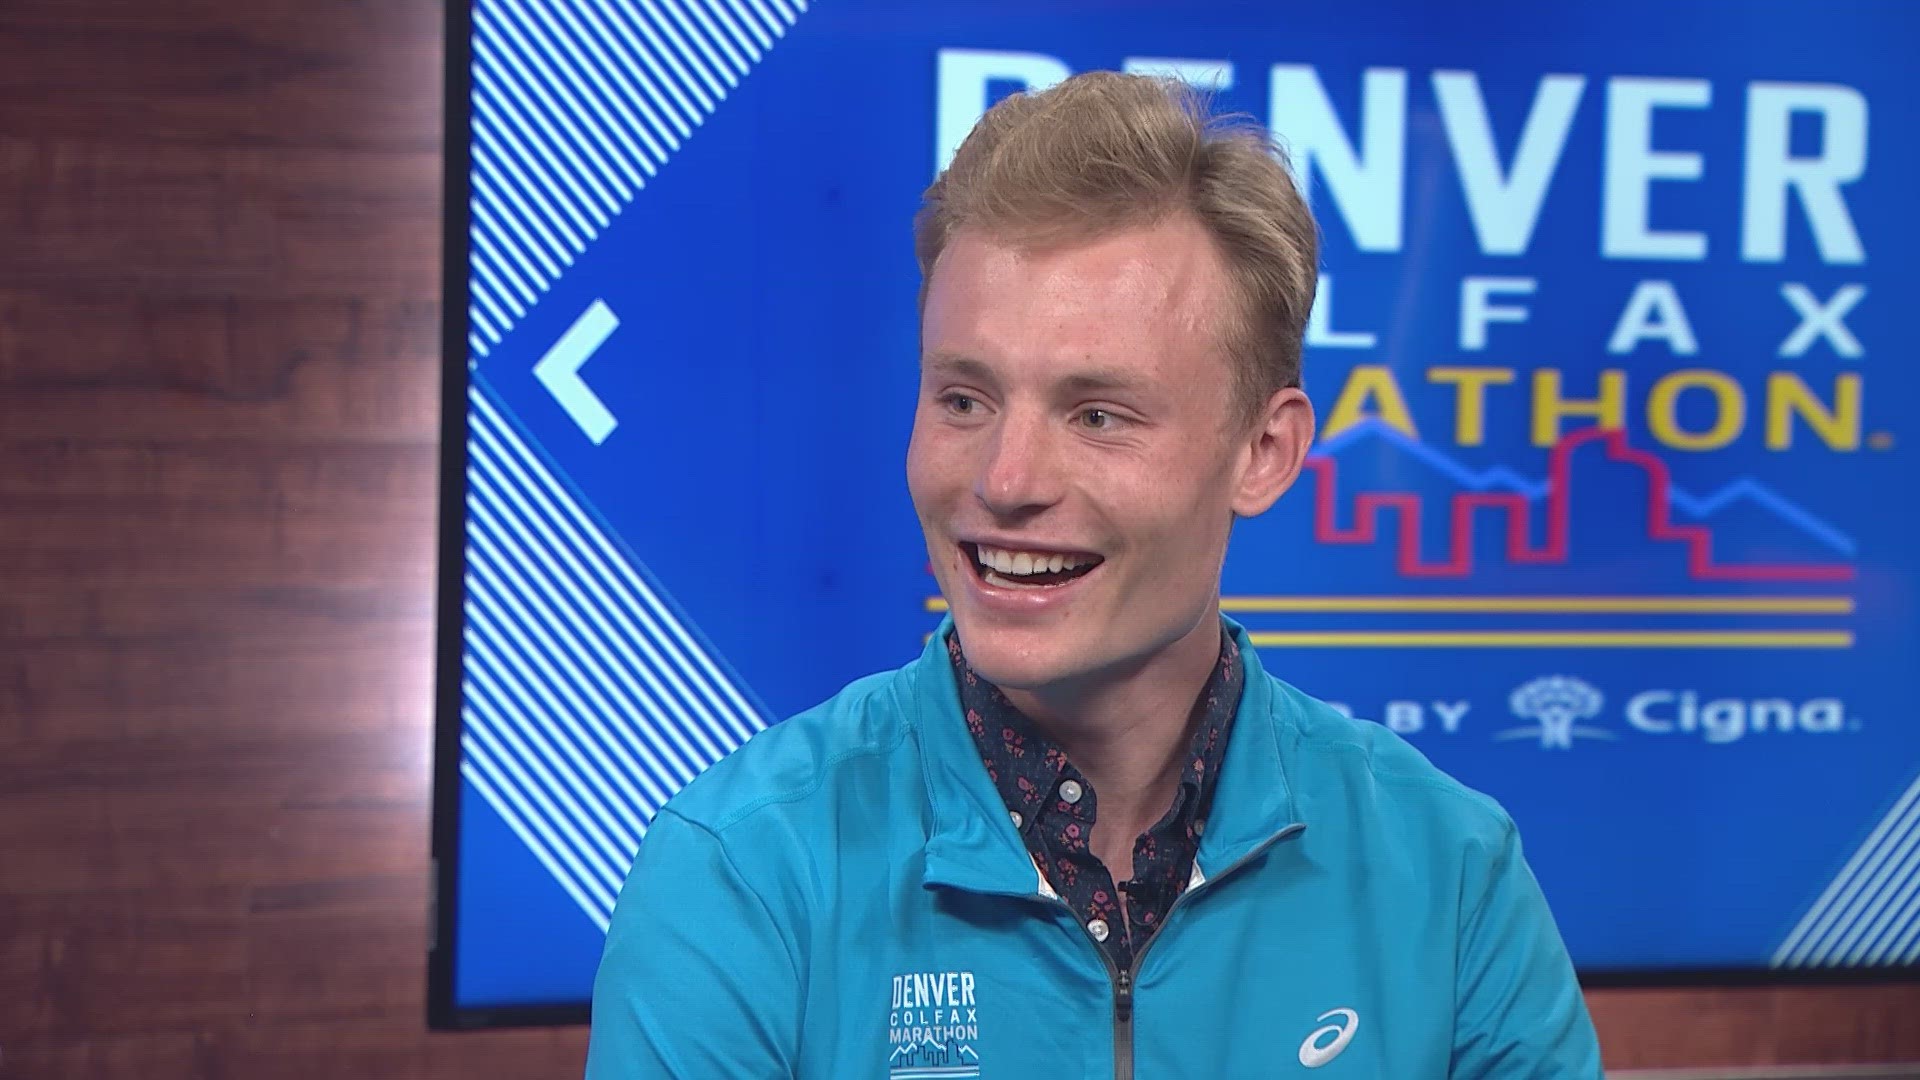 More than 20,000 runners hit the streets for the Colfax Marathon on Sunday. Jack Davidson won the full marathon, and stopped by 9NEWS to talk about the race.